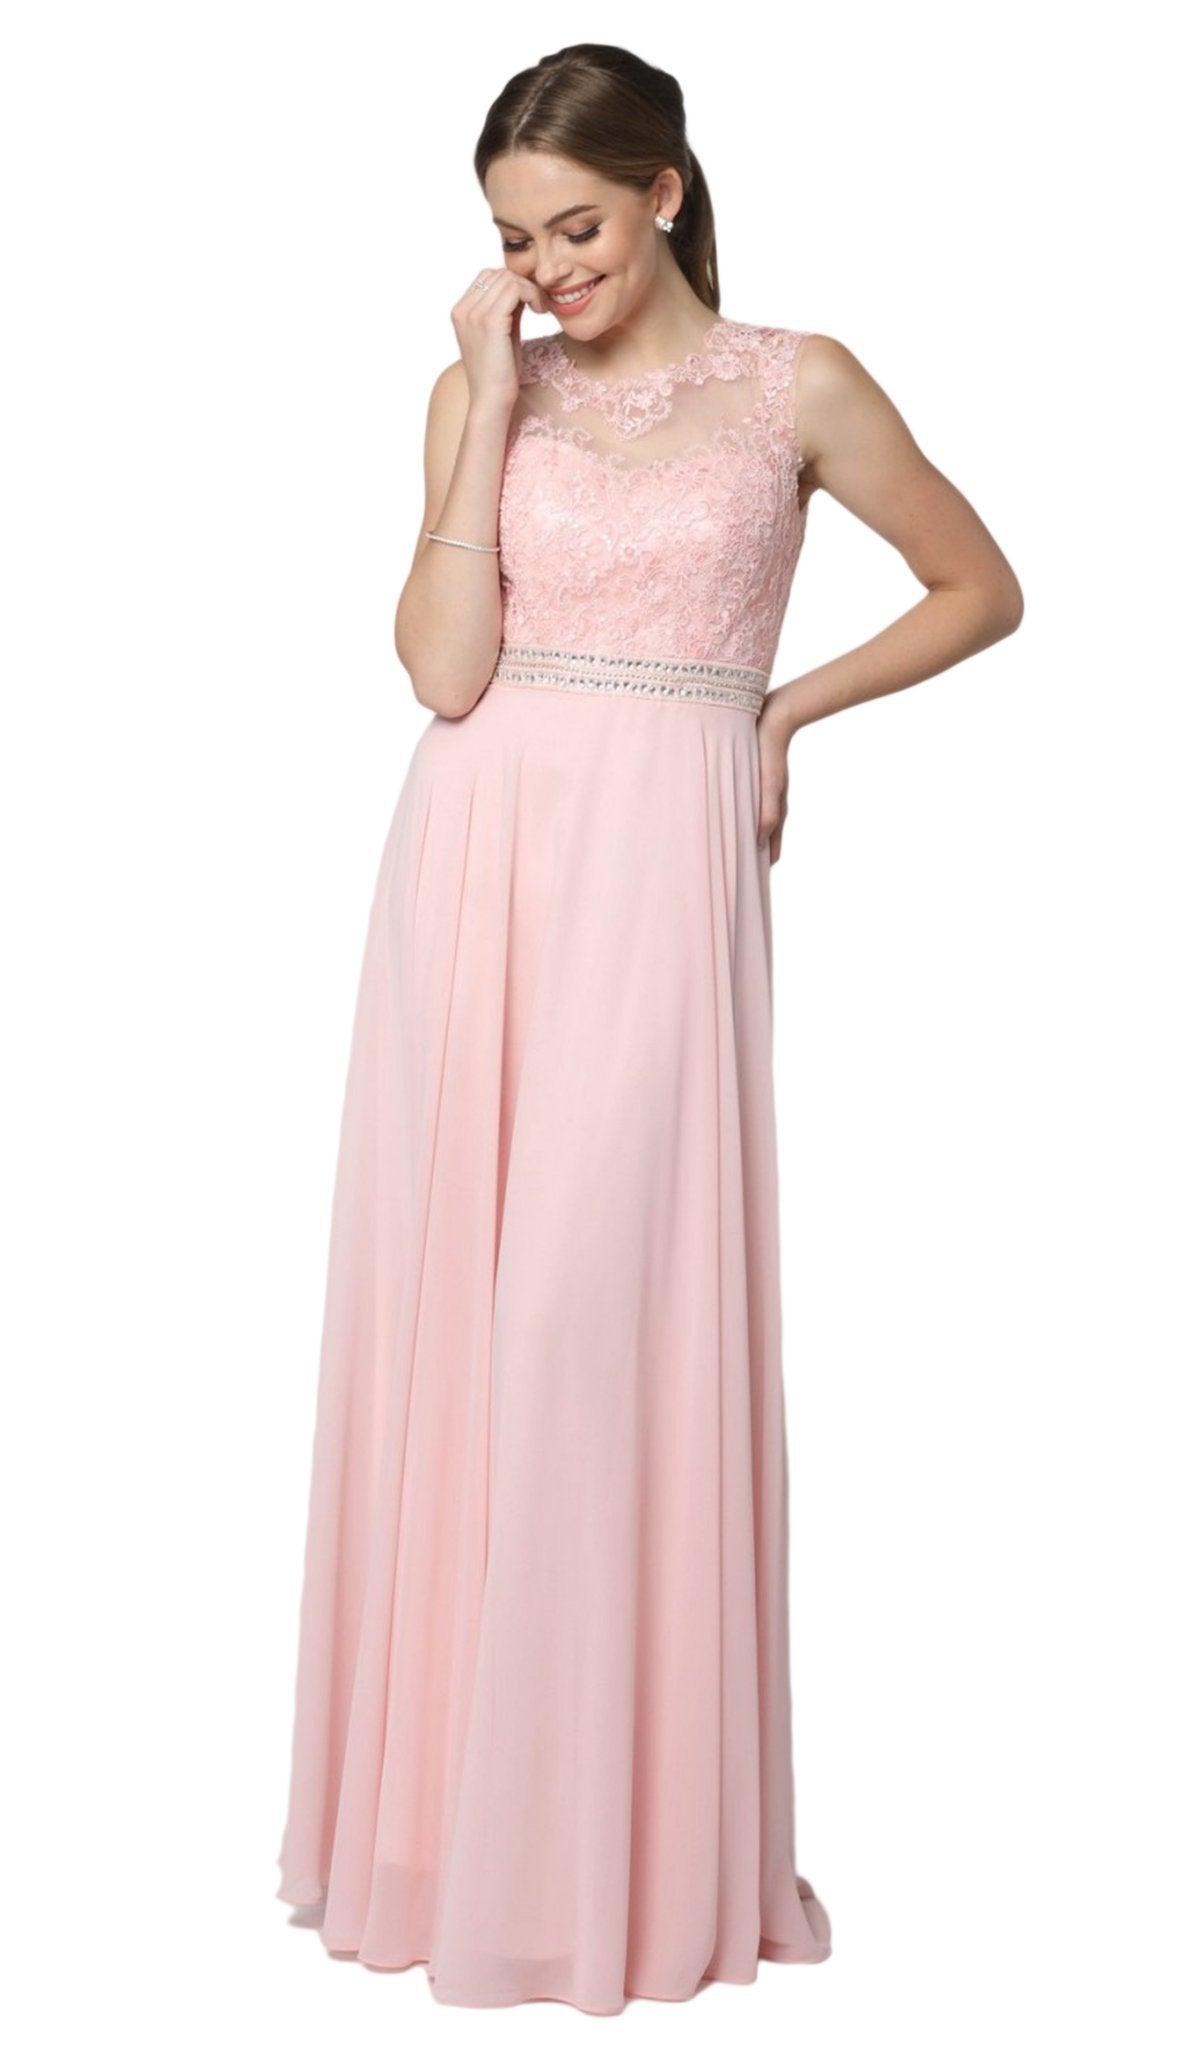 Nox Anabel - Y101P Embroidered Jewel Neck Chiffon A-line Dress Special Occasion Dress 4XL / Blush